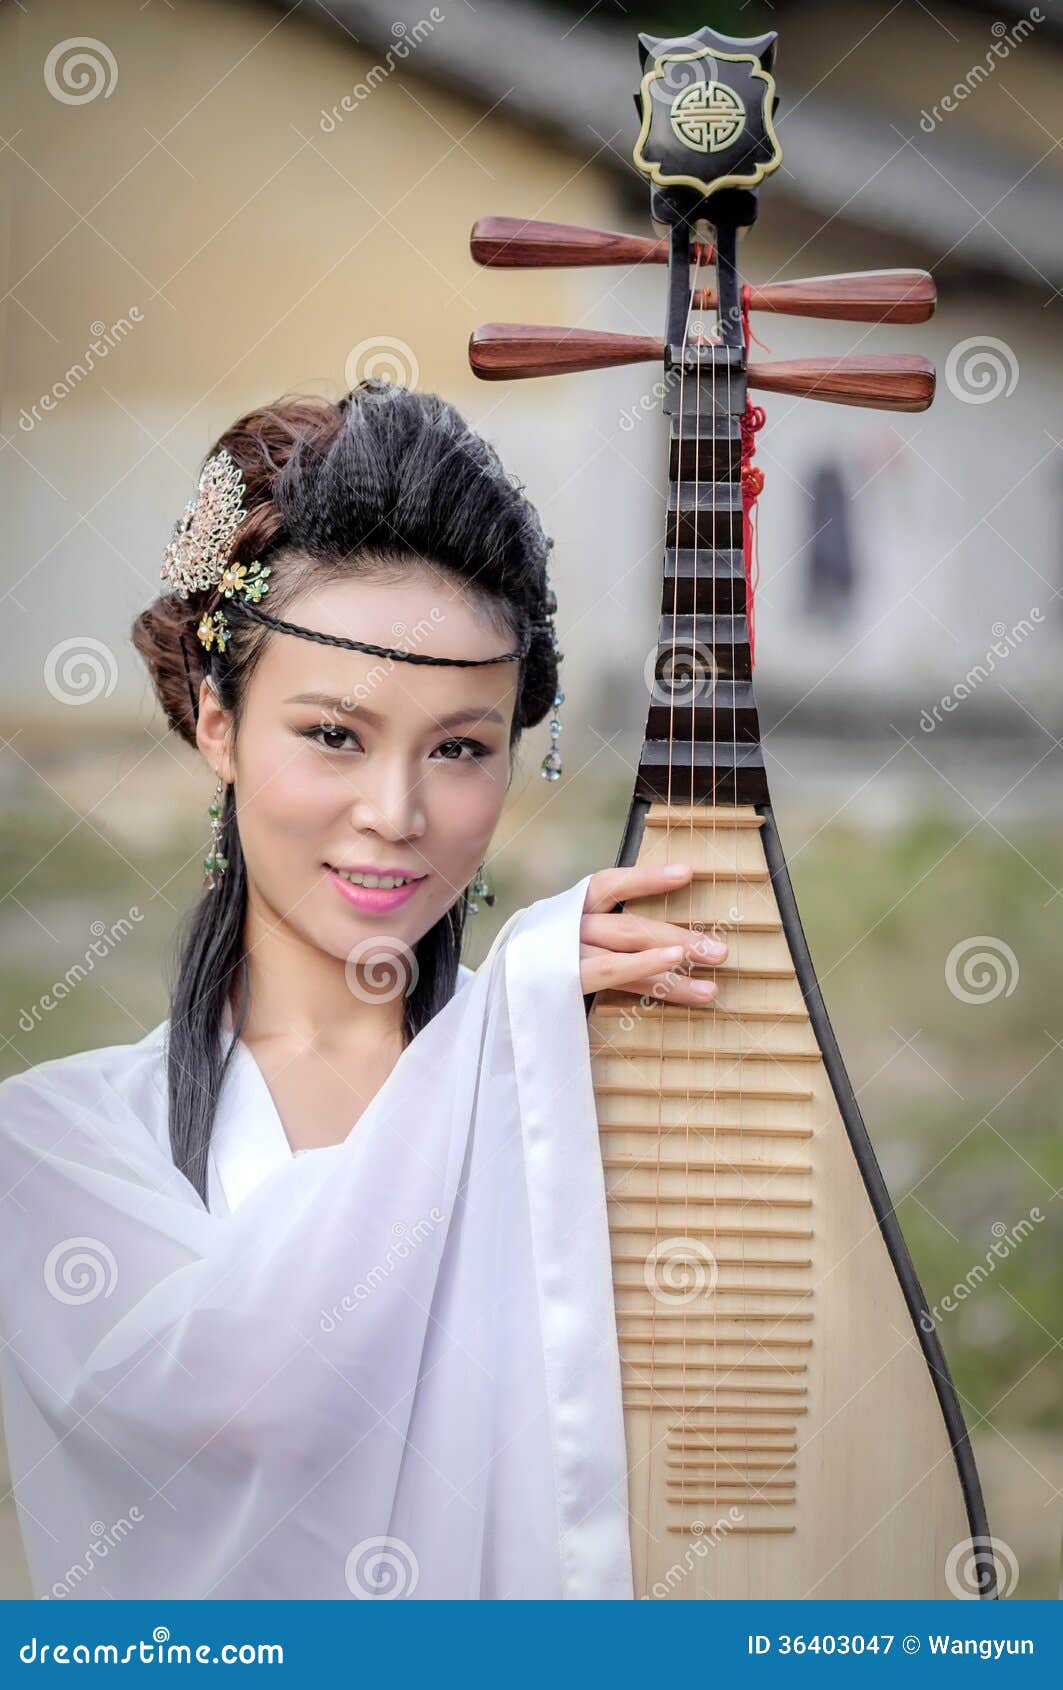 woman playing the pipa